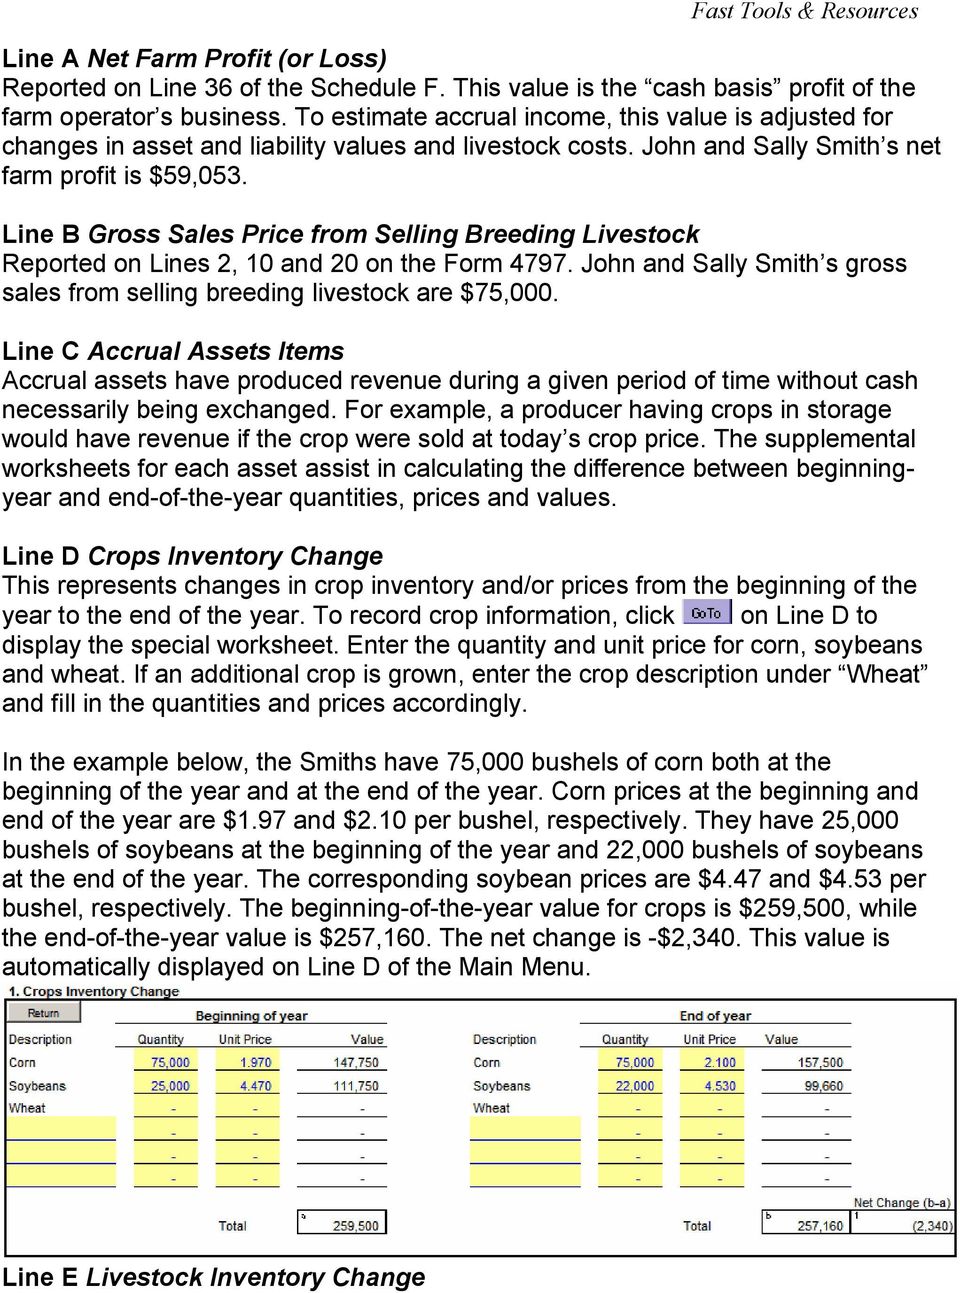 Line B Gross Sales Price from Selling Breeding Livestock Reported on Lines 2, 10 and 20 on the Form 4797. John and Sally Smith s gross sales from selling breeding livestock are $75,000.